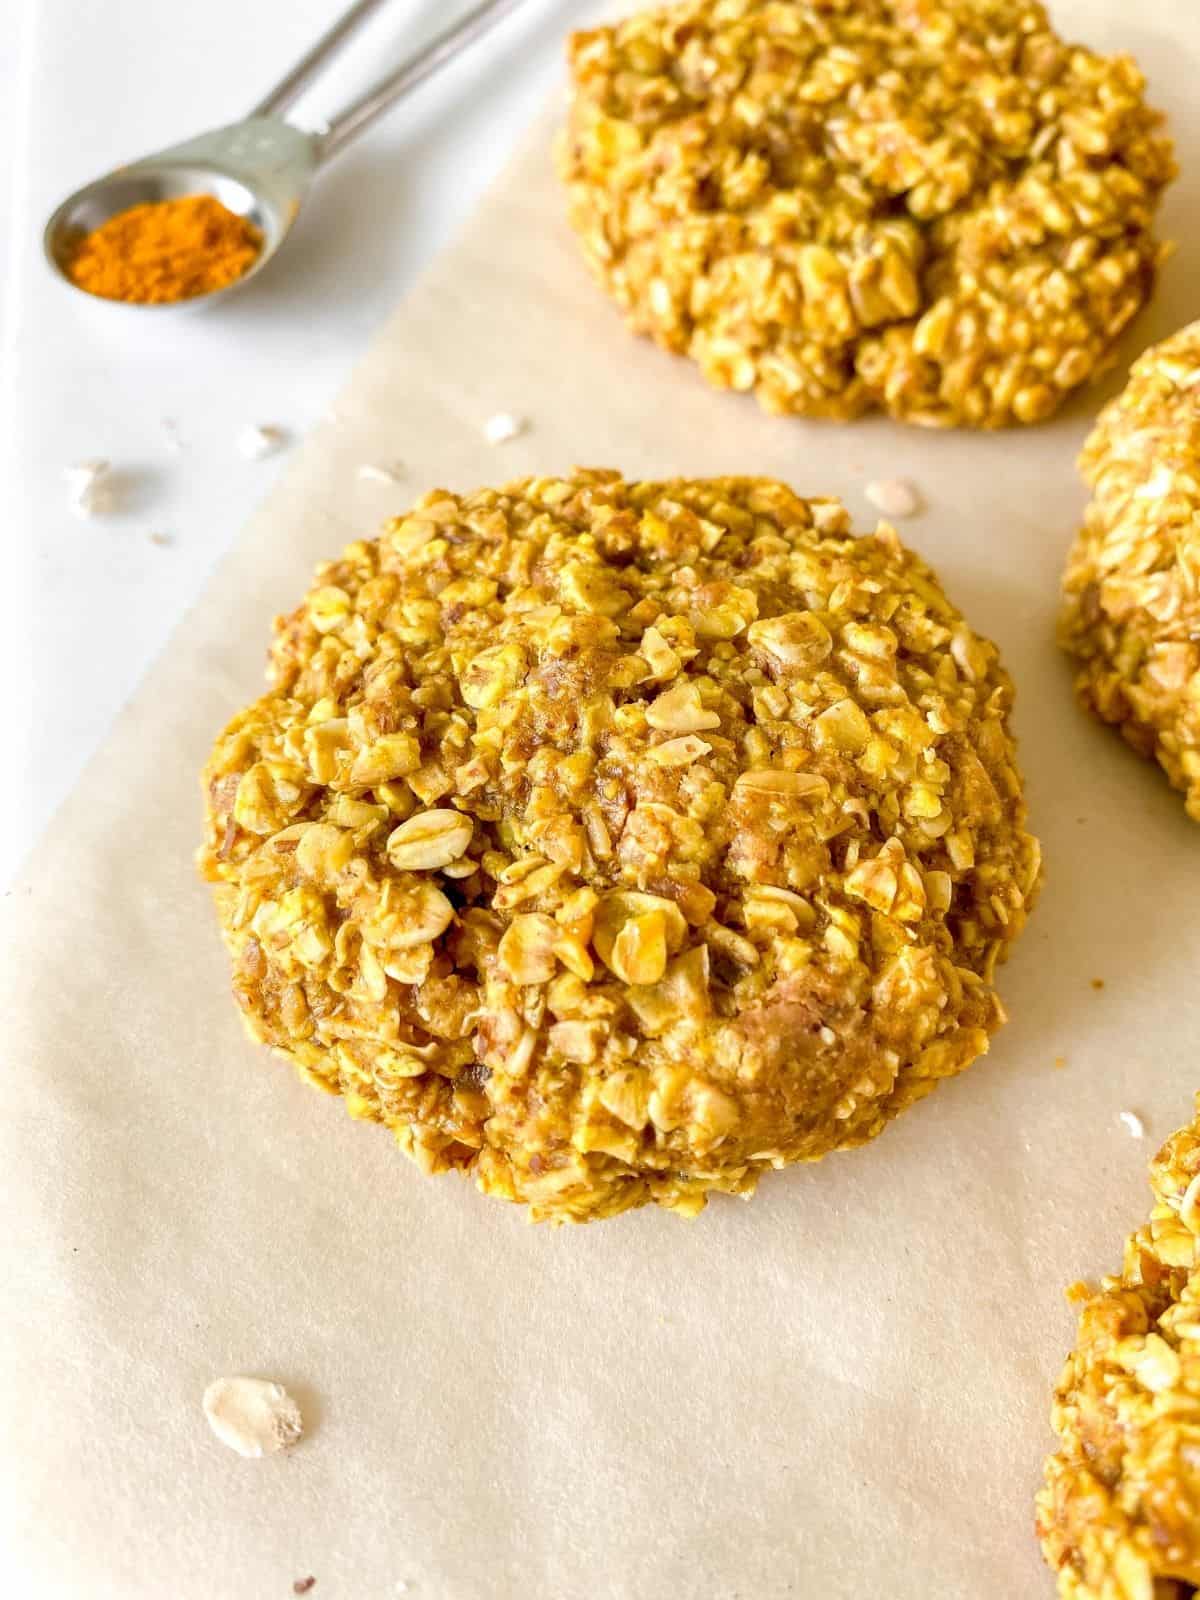 close up of a turmeric oatmeal cookies on parchment paper next to other cookies and a spoonful of turmeric.